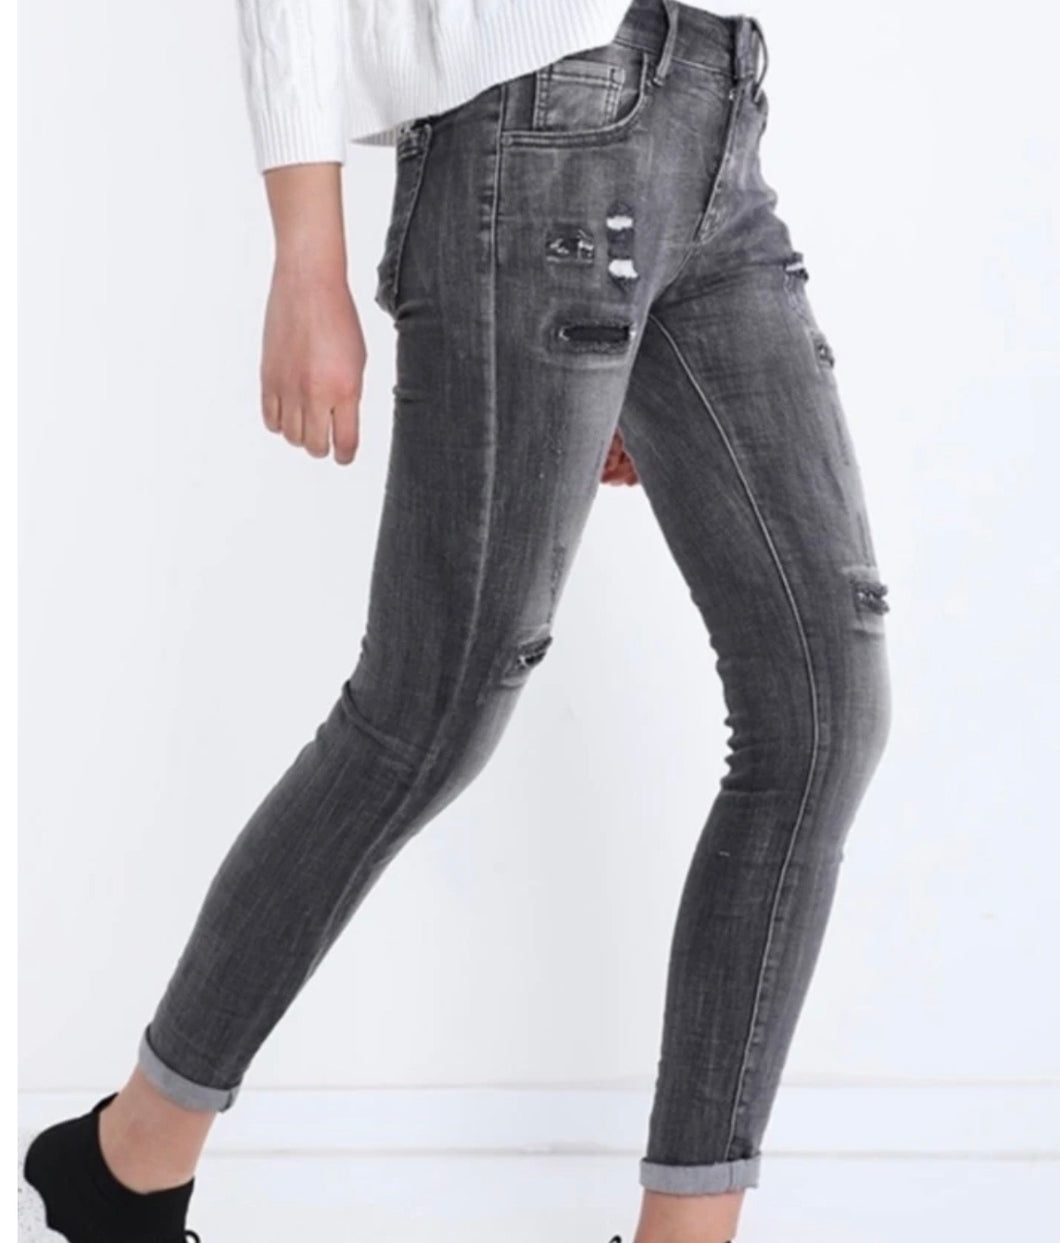 Pescara Jeans by Amici - Black distressed